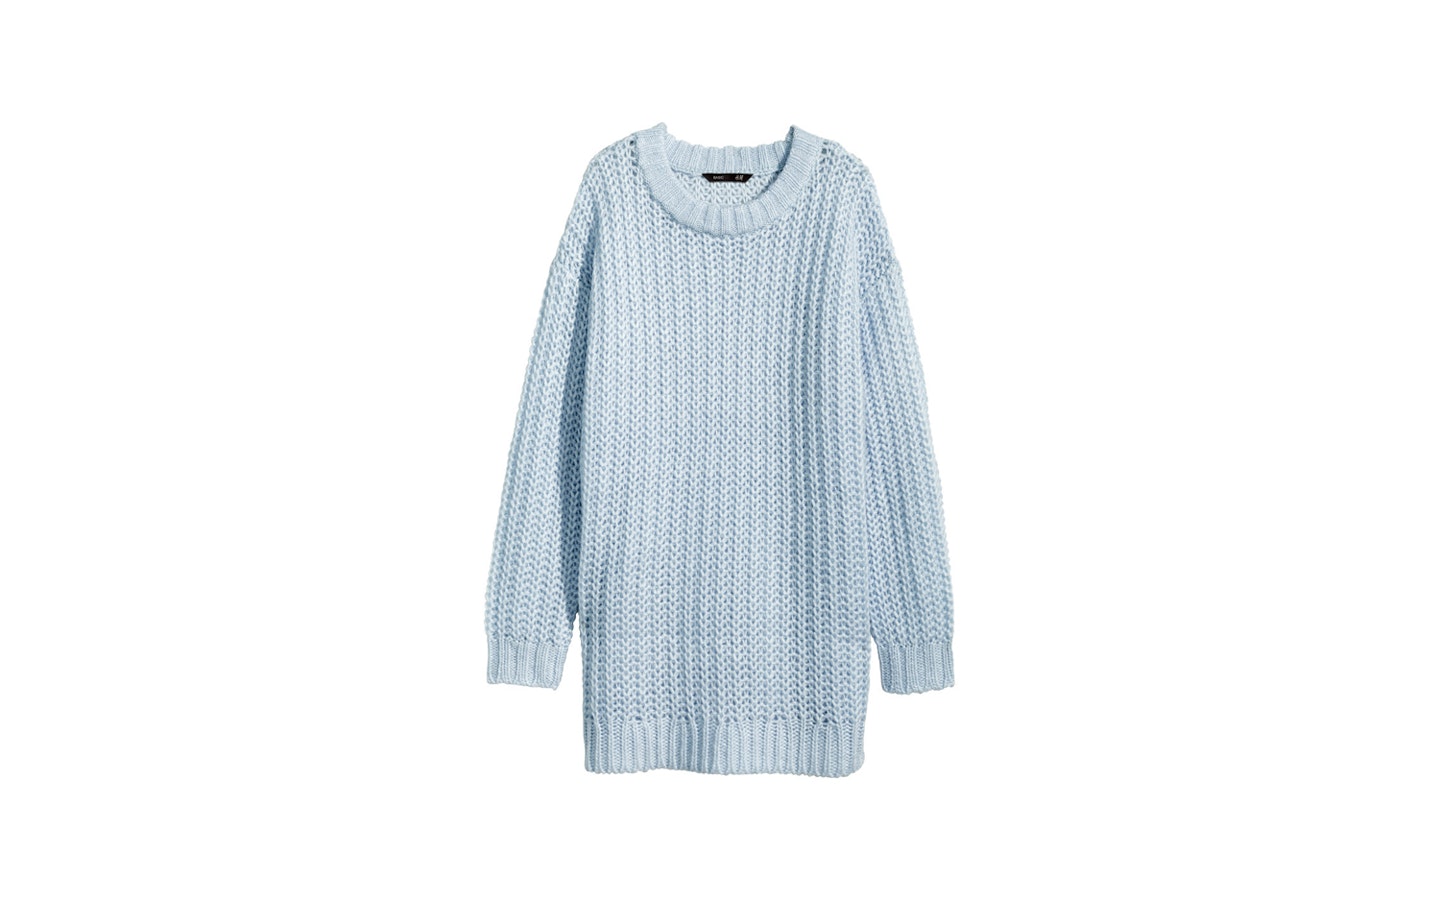 And if you would rather go for baby blue than pink, try this Blue Knitted Jumper, £19.99, <a title="hm.com" href="http://www.hm.com/gb/product/56231?article=56231-B" target="_blank">hm.com</a>